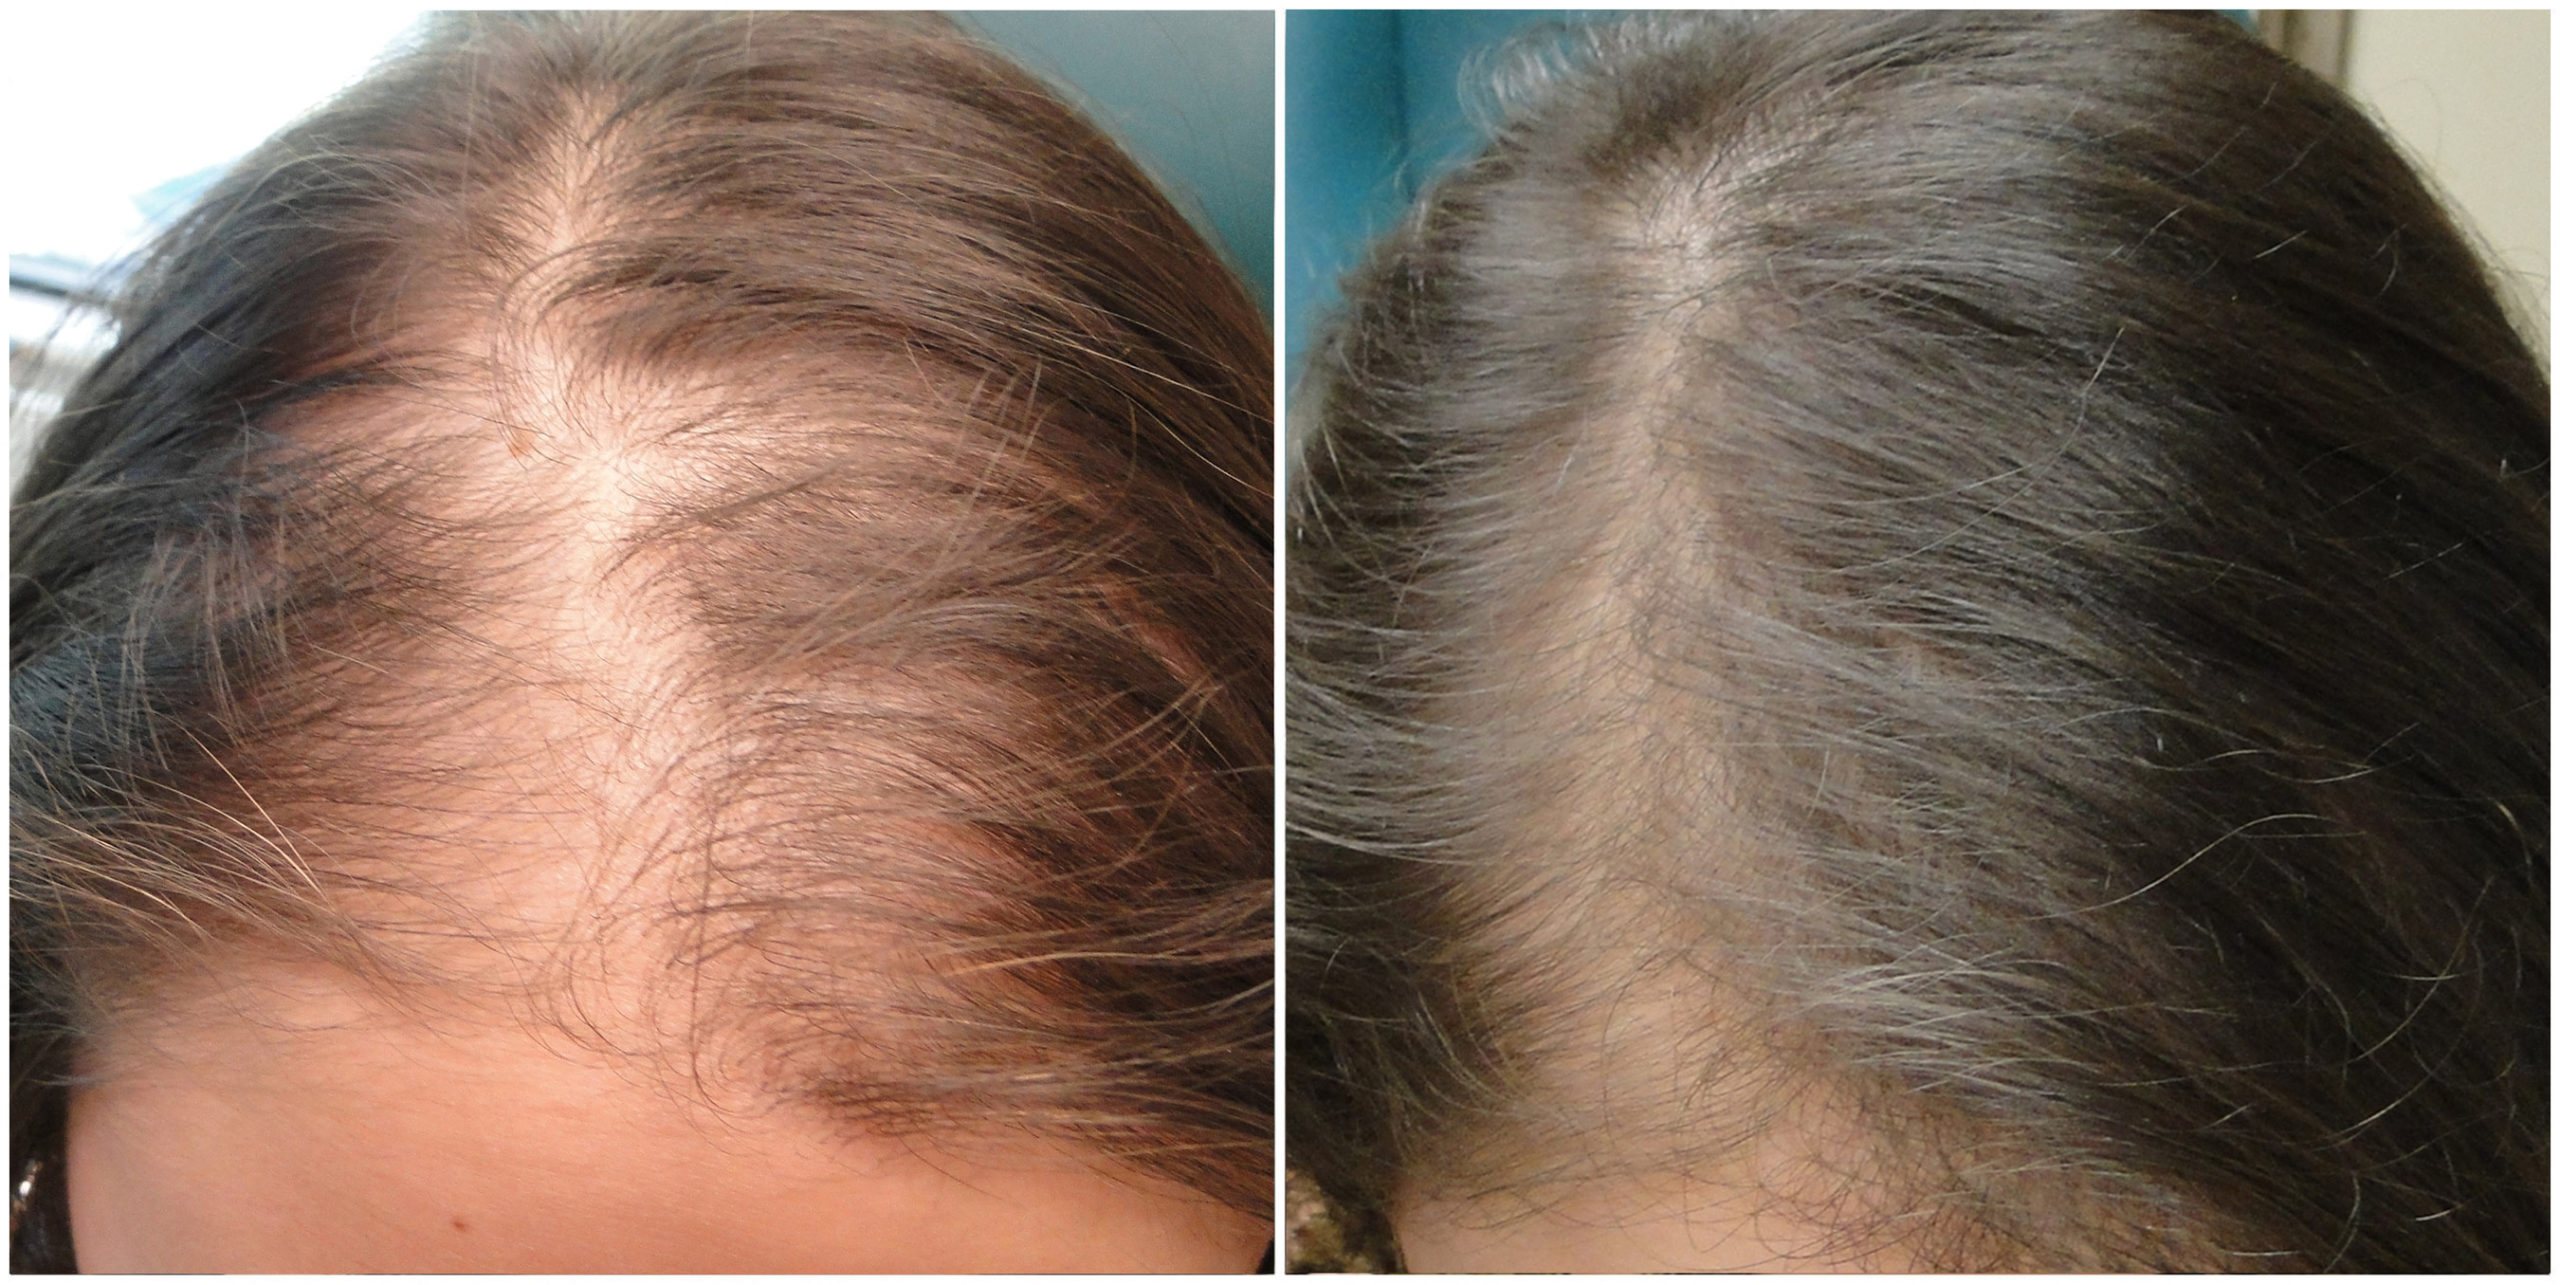 A new, non-invasive technique called PRP (Platelet Rich Plasma Therapy) effectively treats hair loss with zero downtime. This non-surgical treatment starts at $400 per session and simply requires a few injections into the scalp to help encourage regrowth and stimulation of hair follicles, resulting in fuller, thicker hair. (PRNewsFoto/Dr. Jeffrey Rapaport)